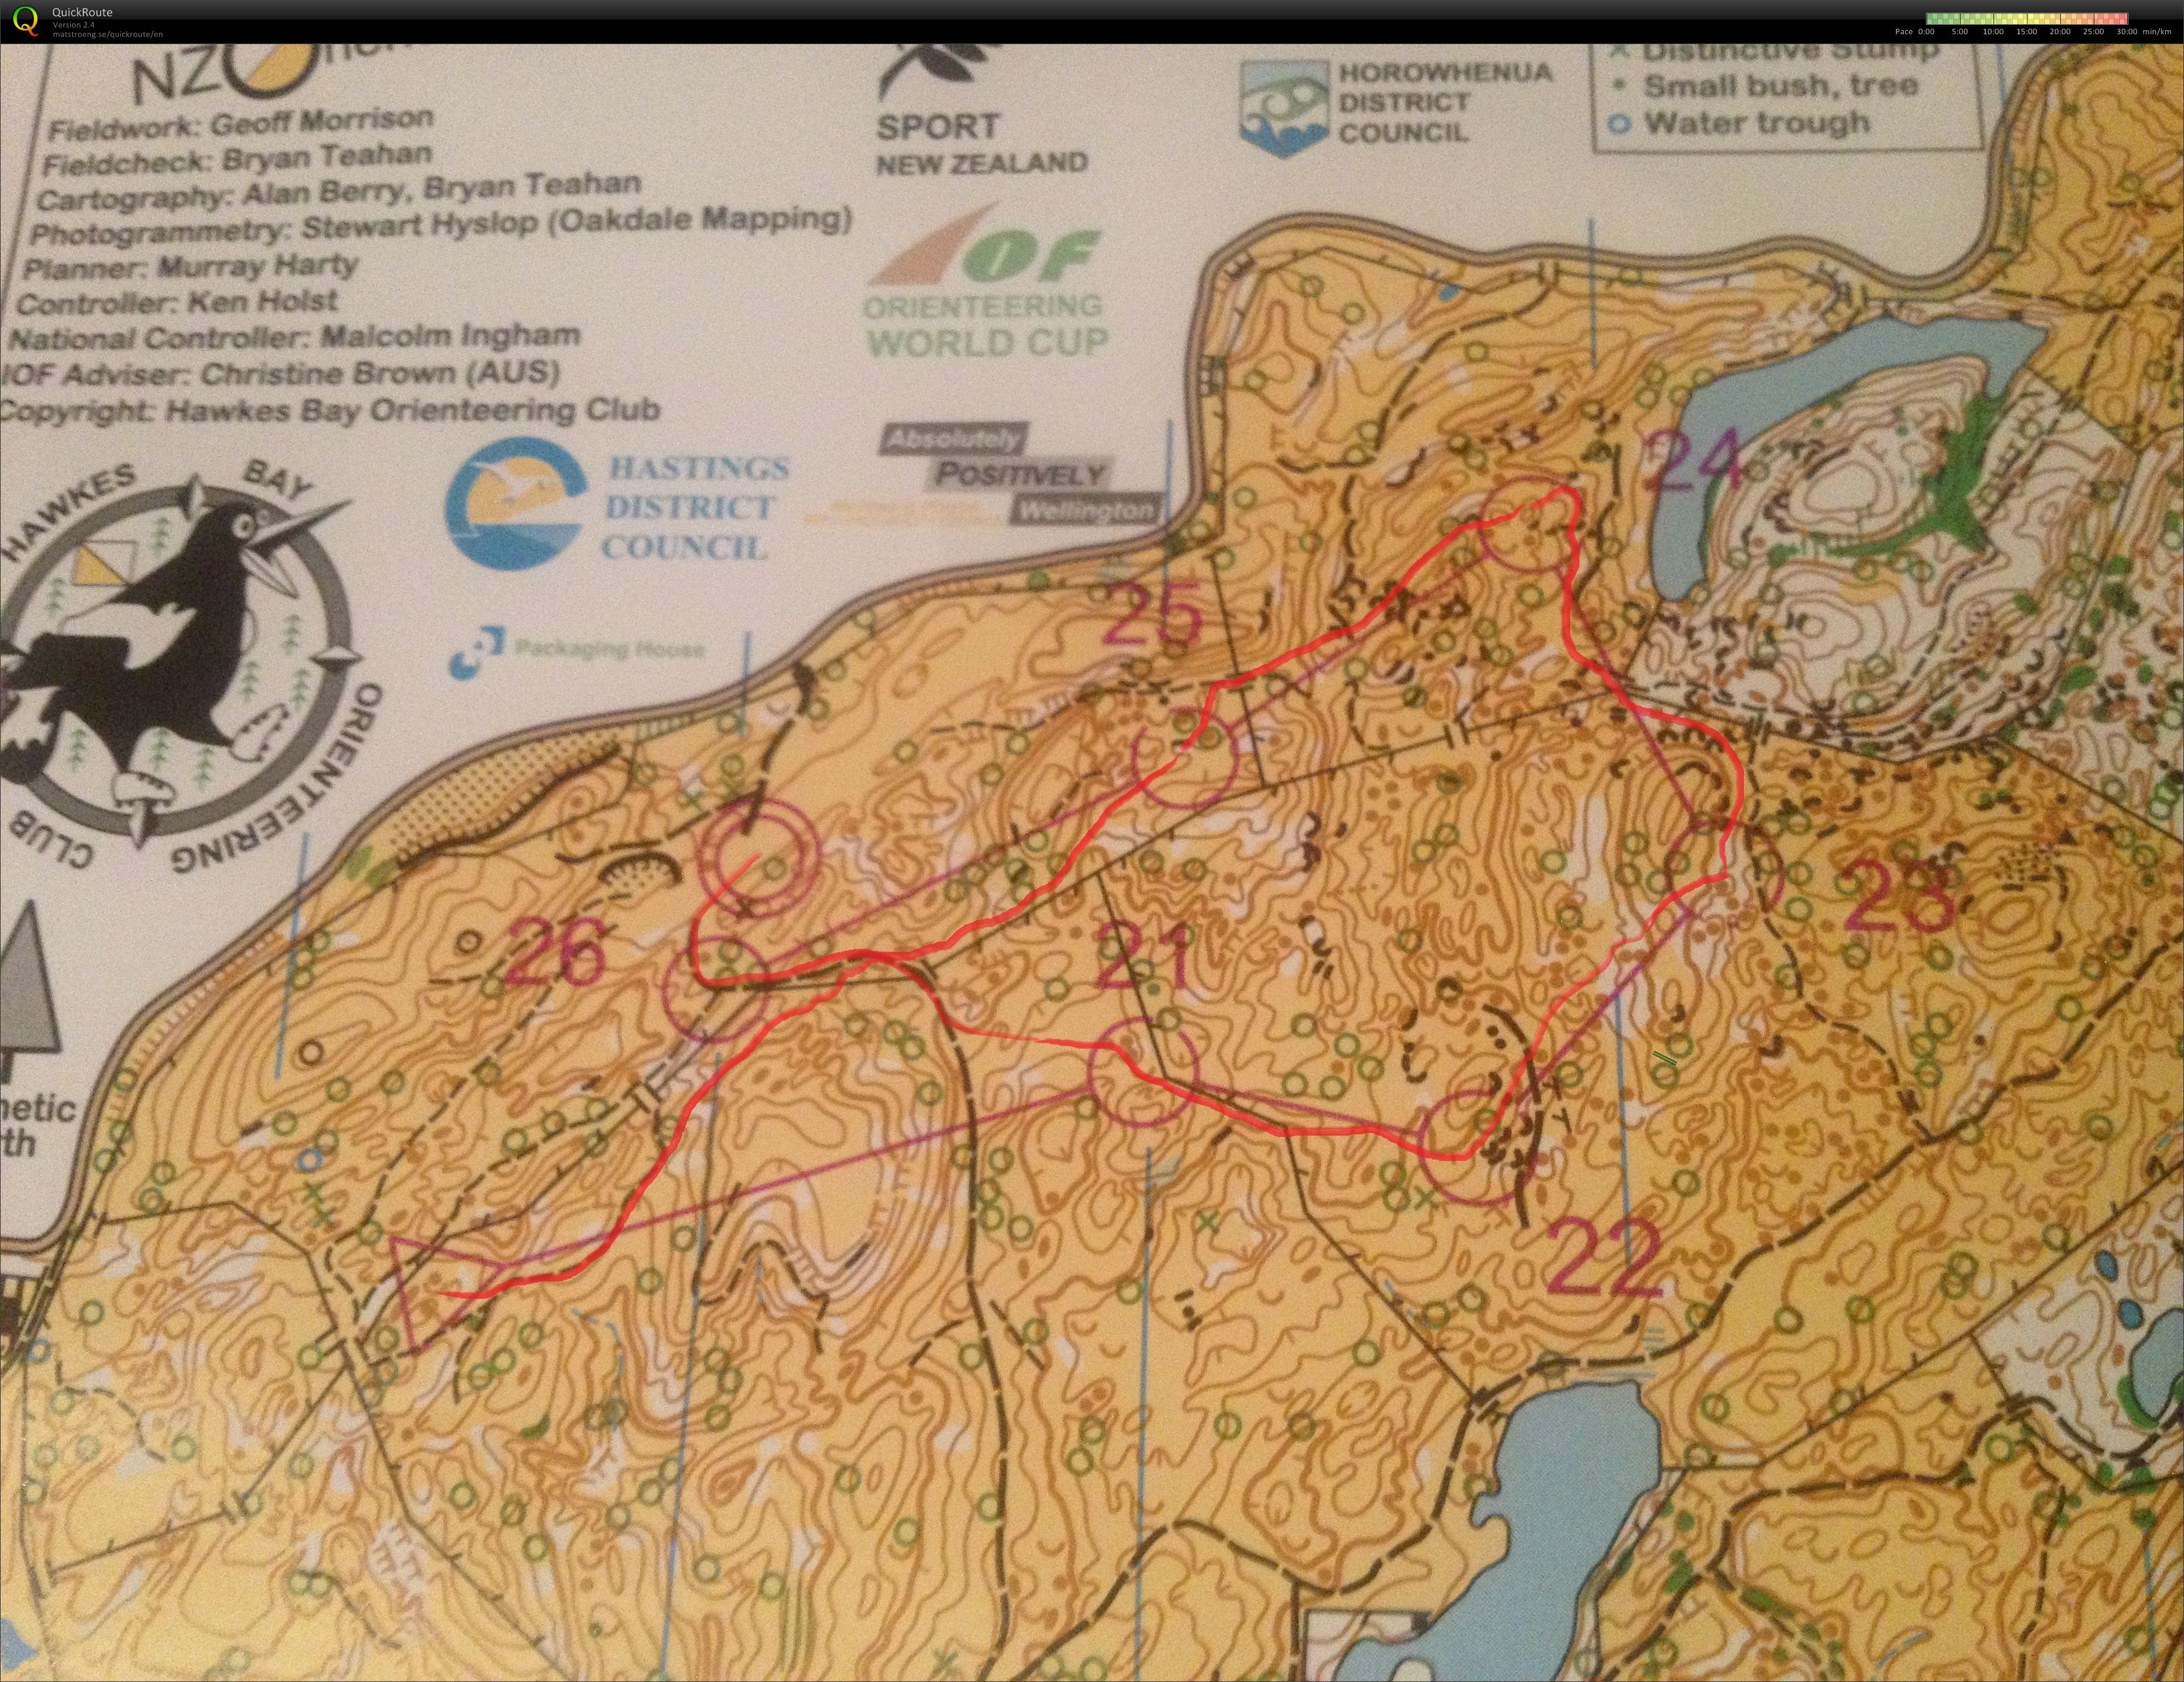 2013 World Cup 3 Chasing Start Map 2 (13-01-2013)